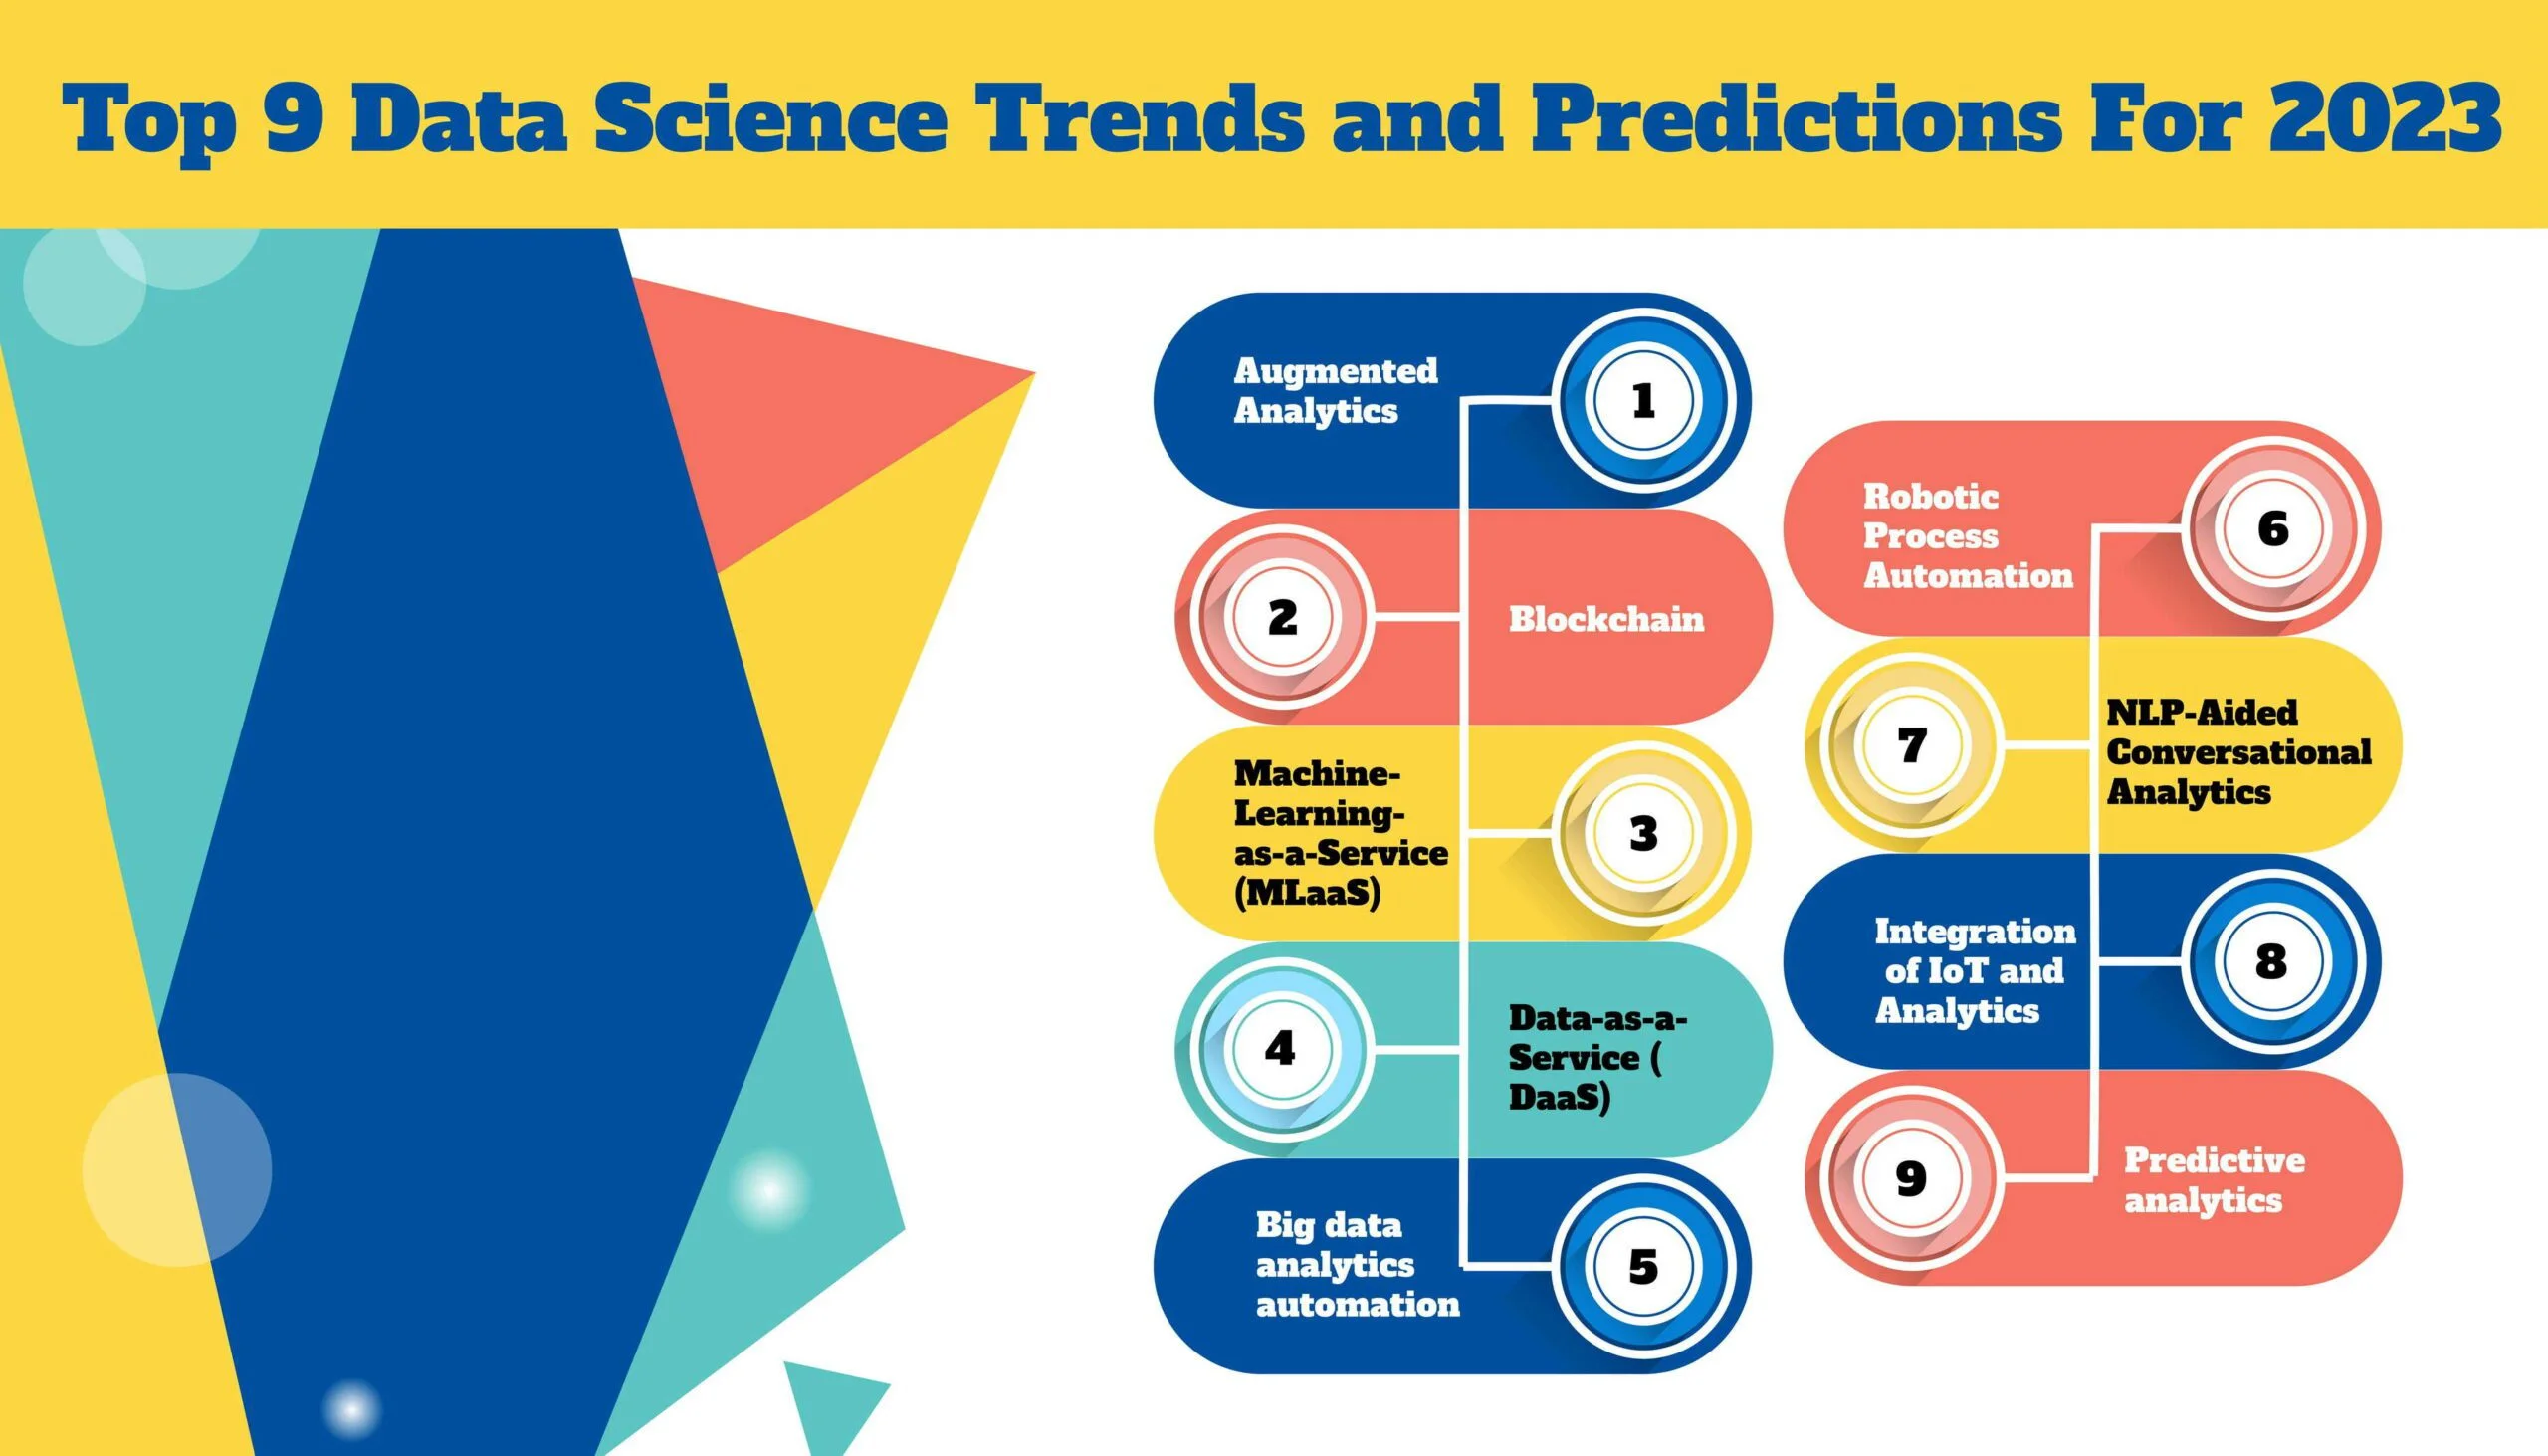 Top 9 Data Science Trends and Predictions For 2023